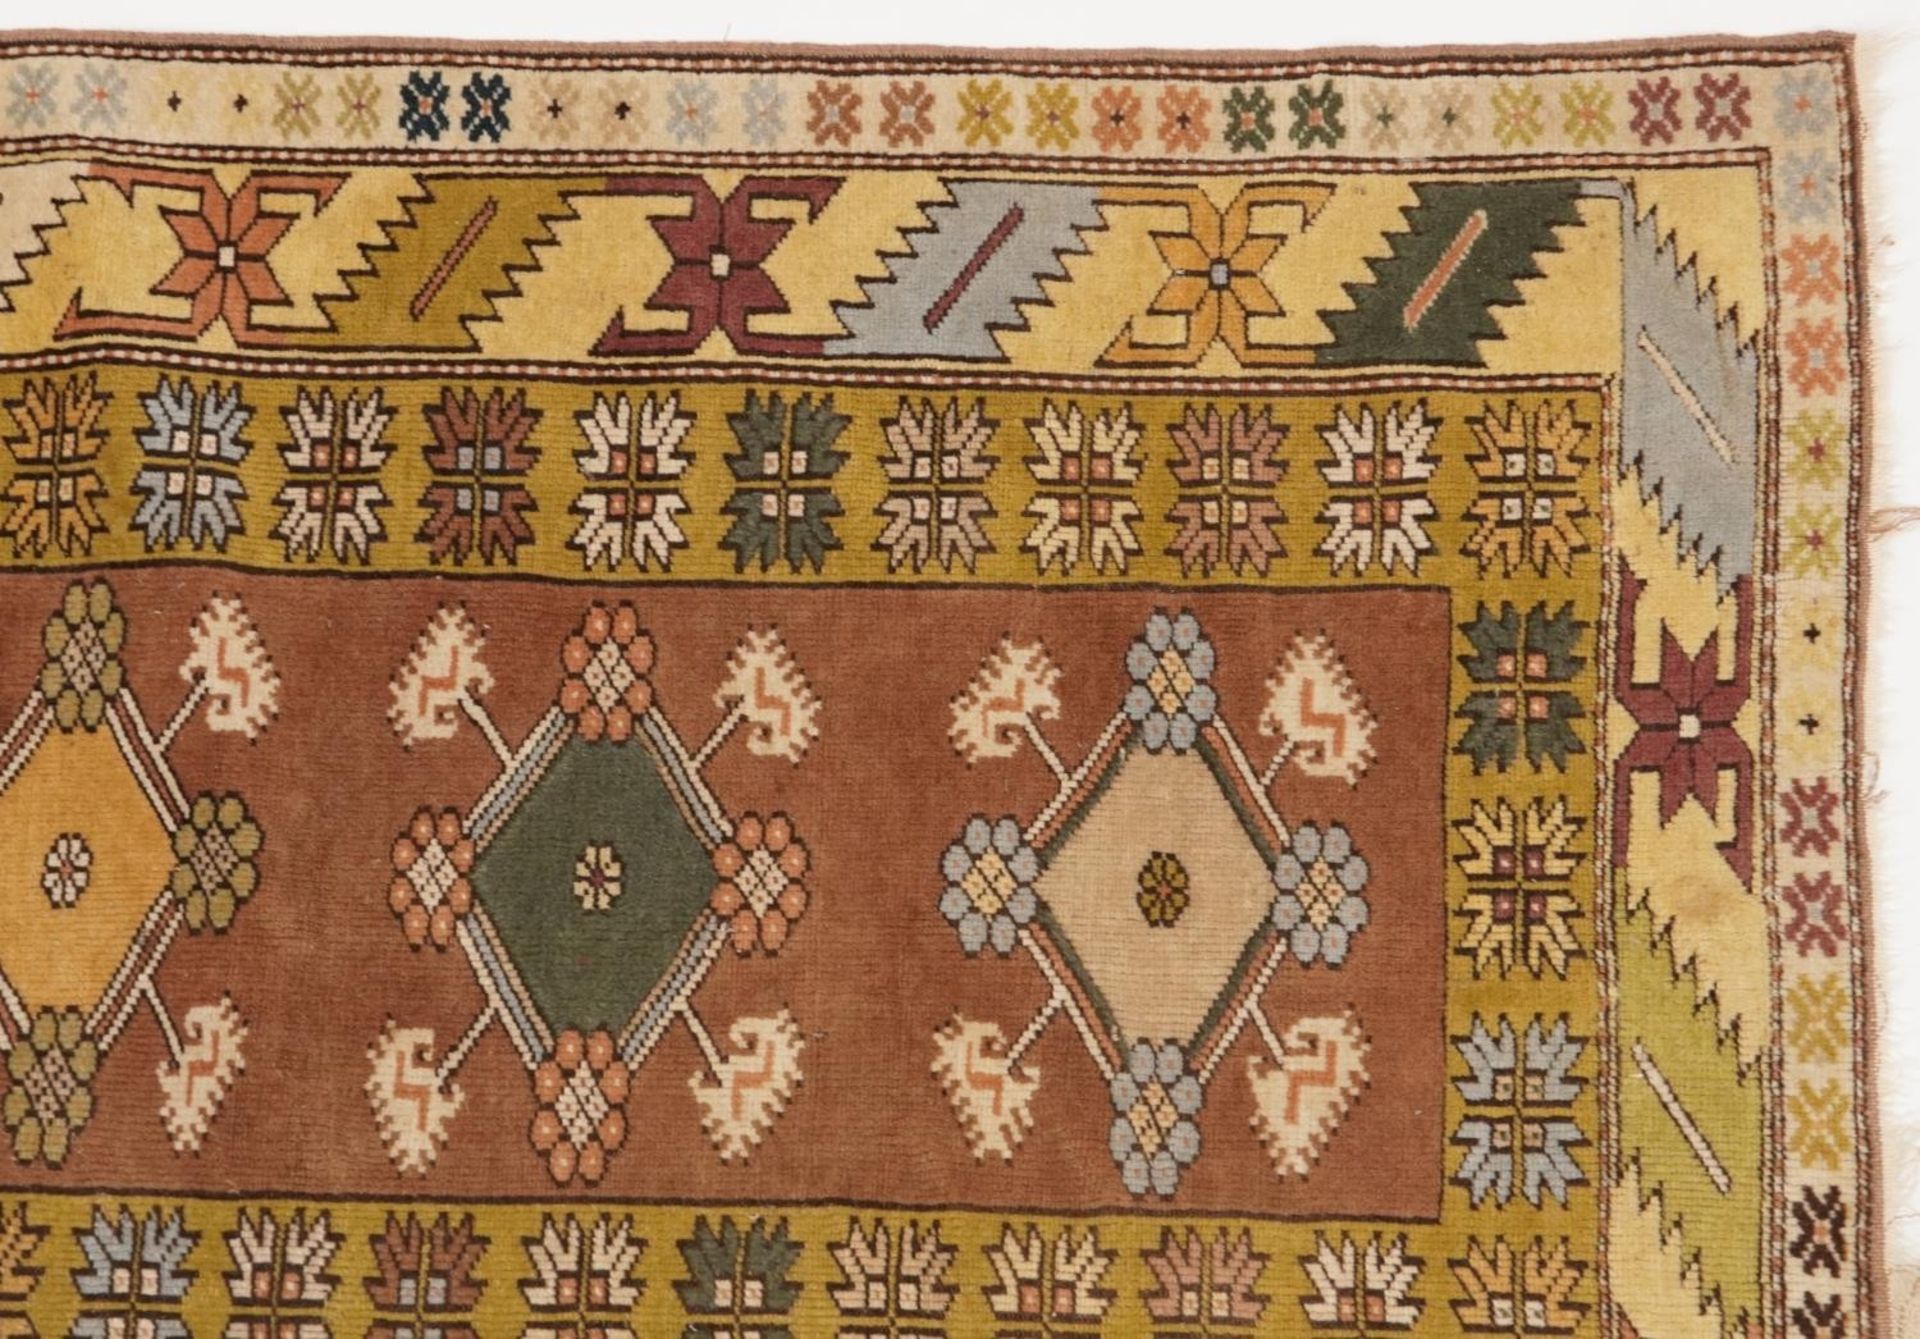 Rectangular beige ground rug with all over geometric design, 200cm x 117 - Image 3 of 5